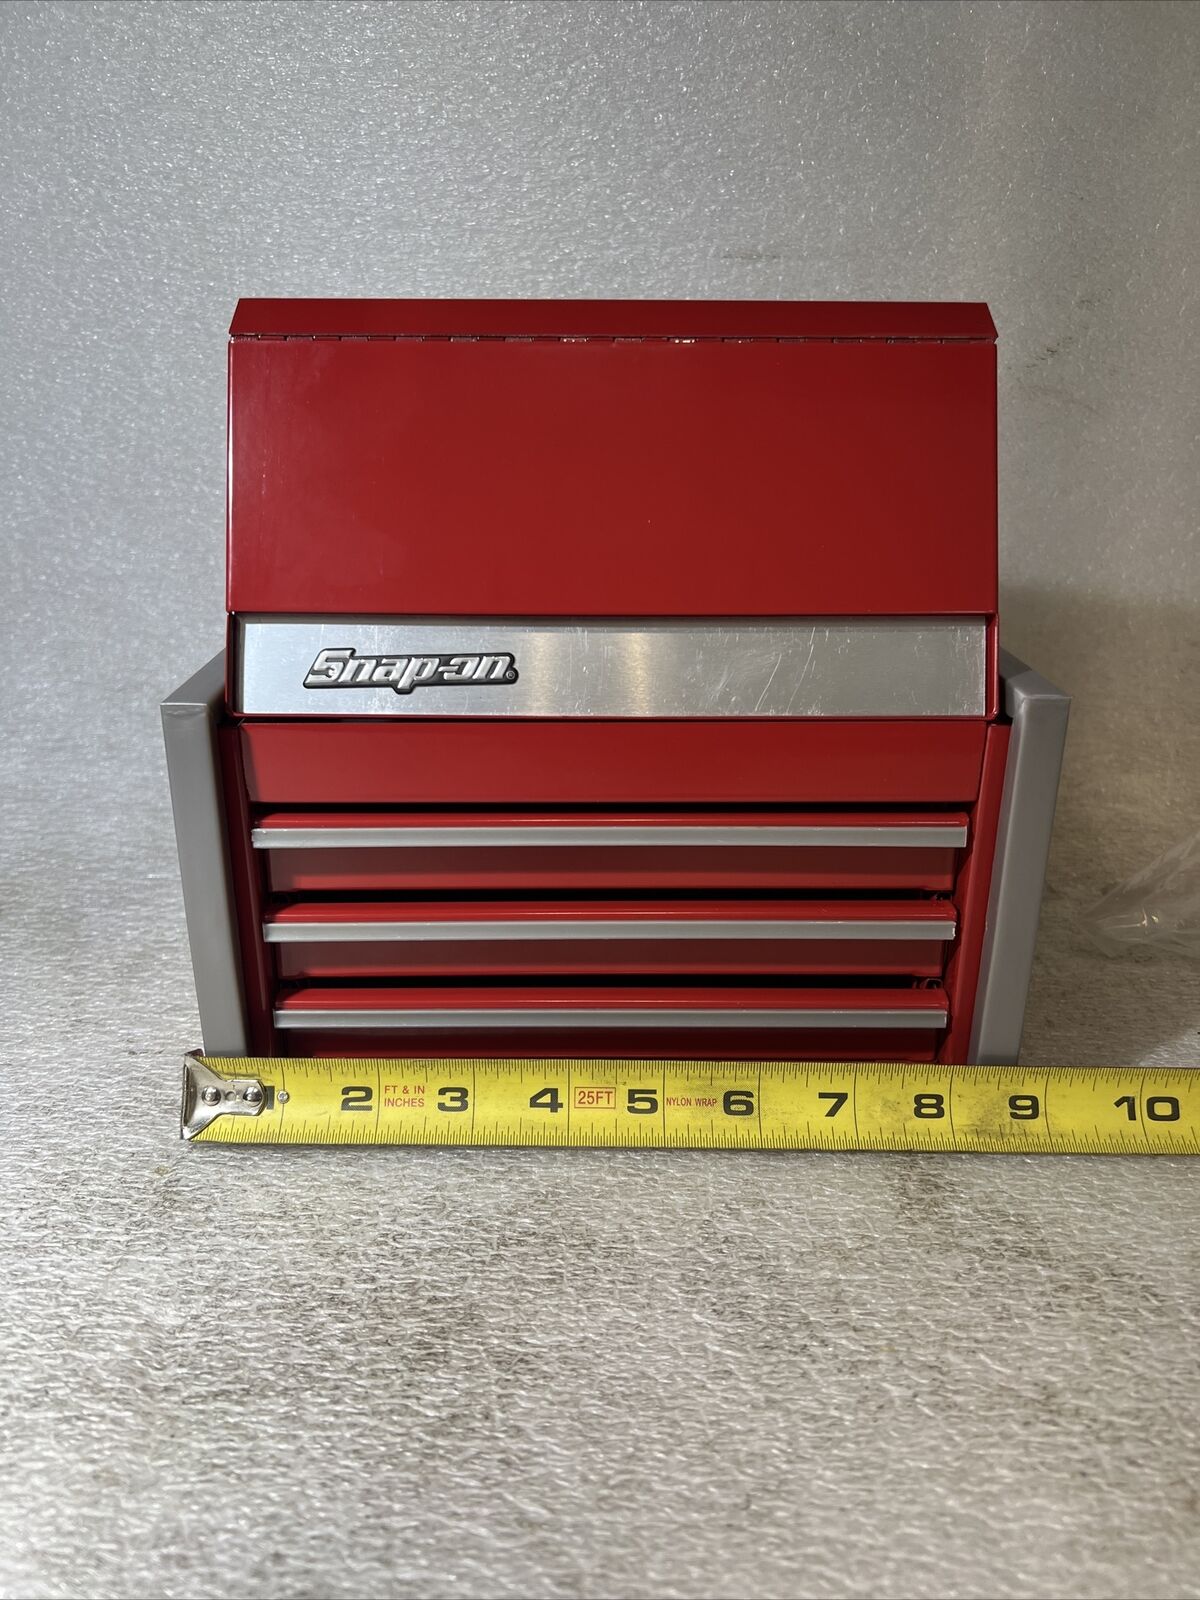 Snap-on RED Mini Micro Tool Box ~ Top Chest - KMC923A *NEW IN BOX*